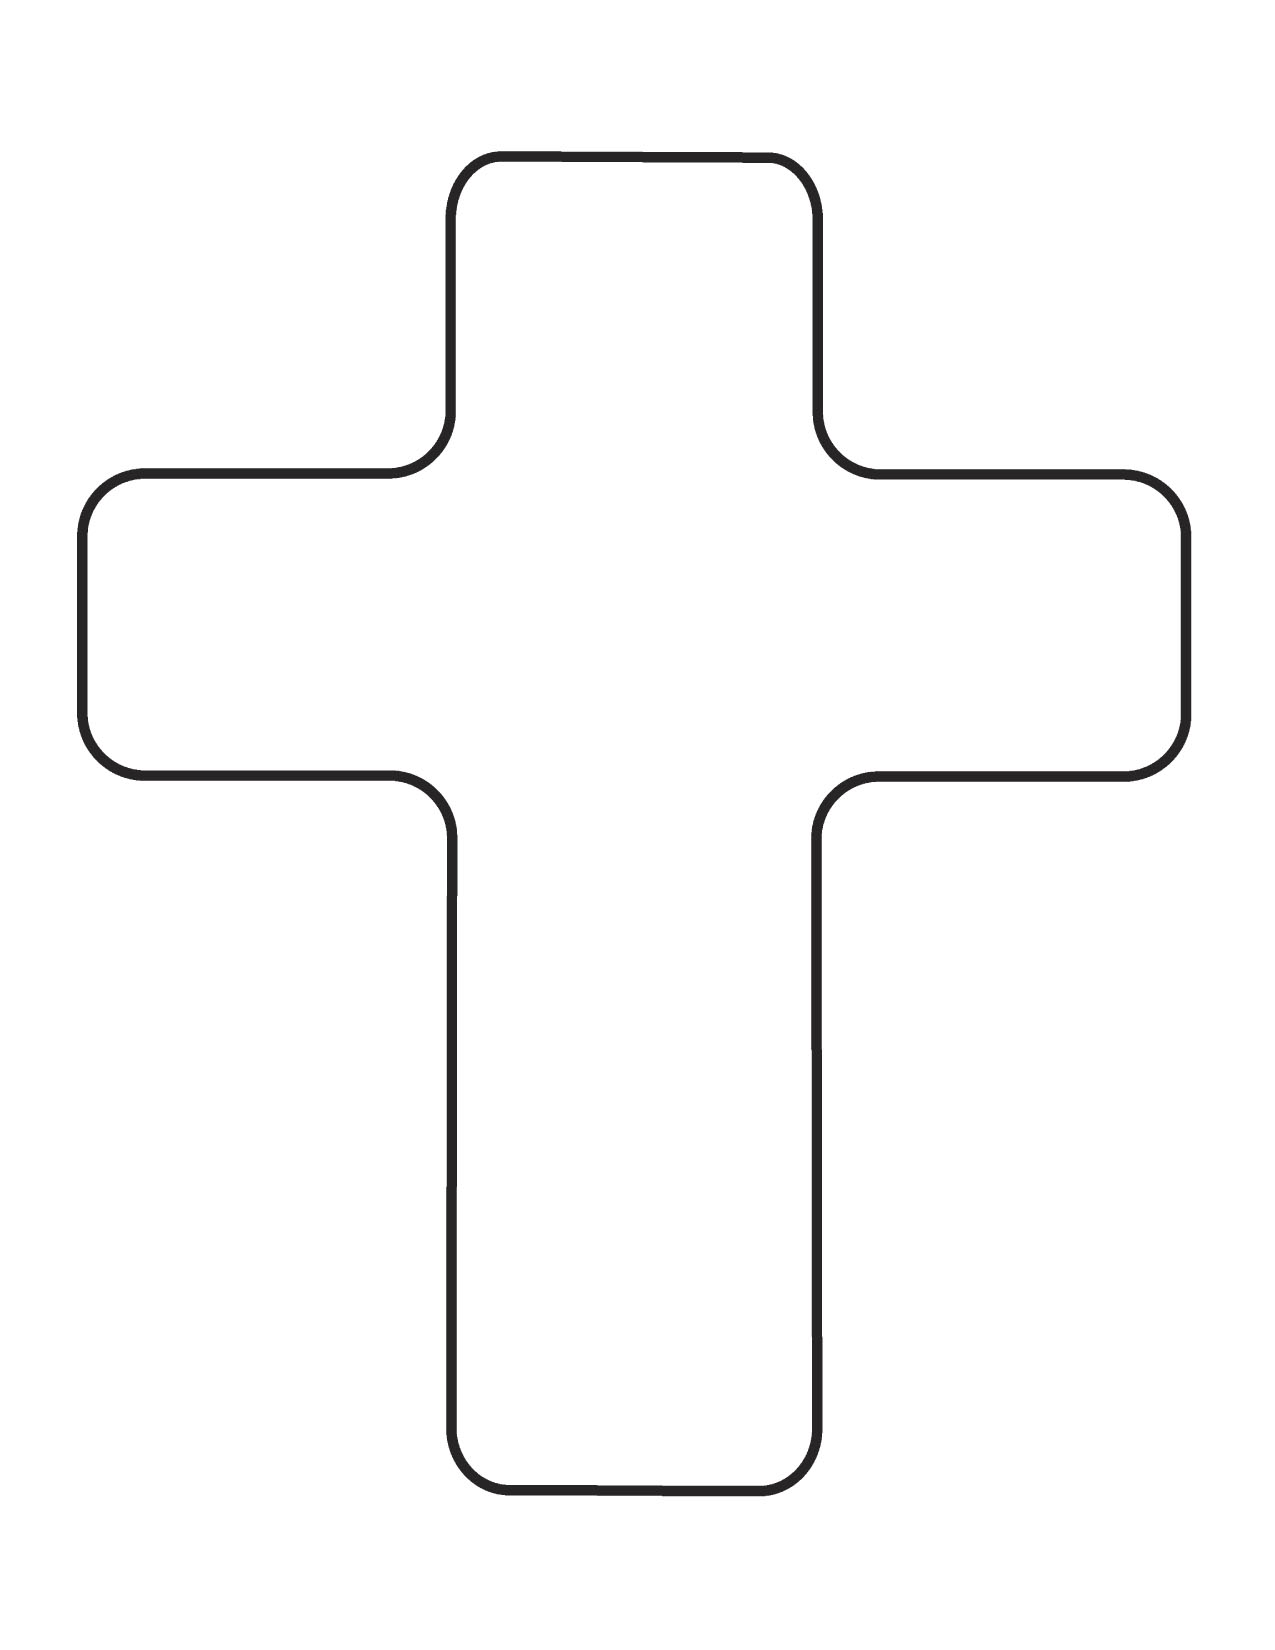 cross clipart - group picture, image by tag - keywordpictures.